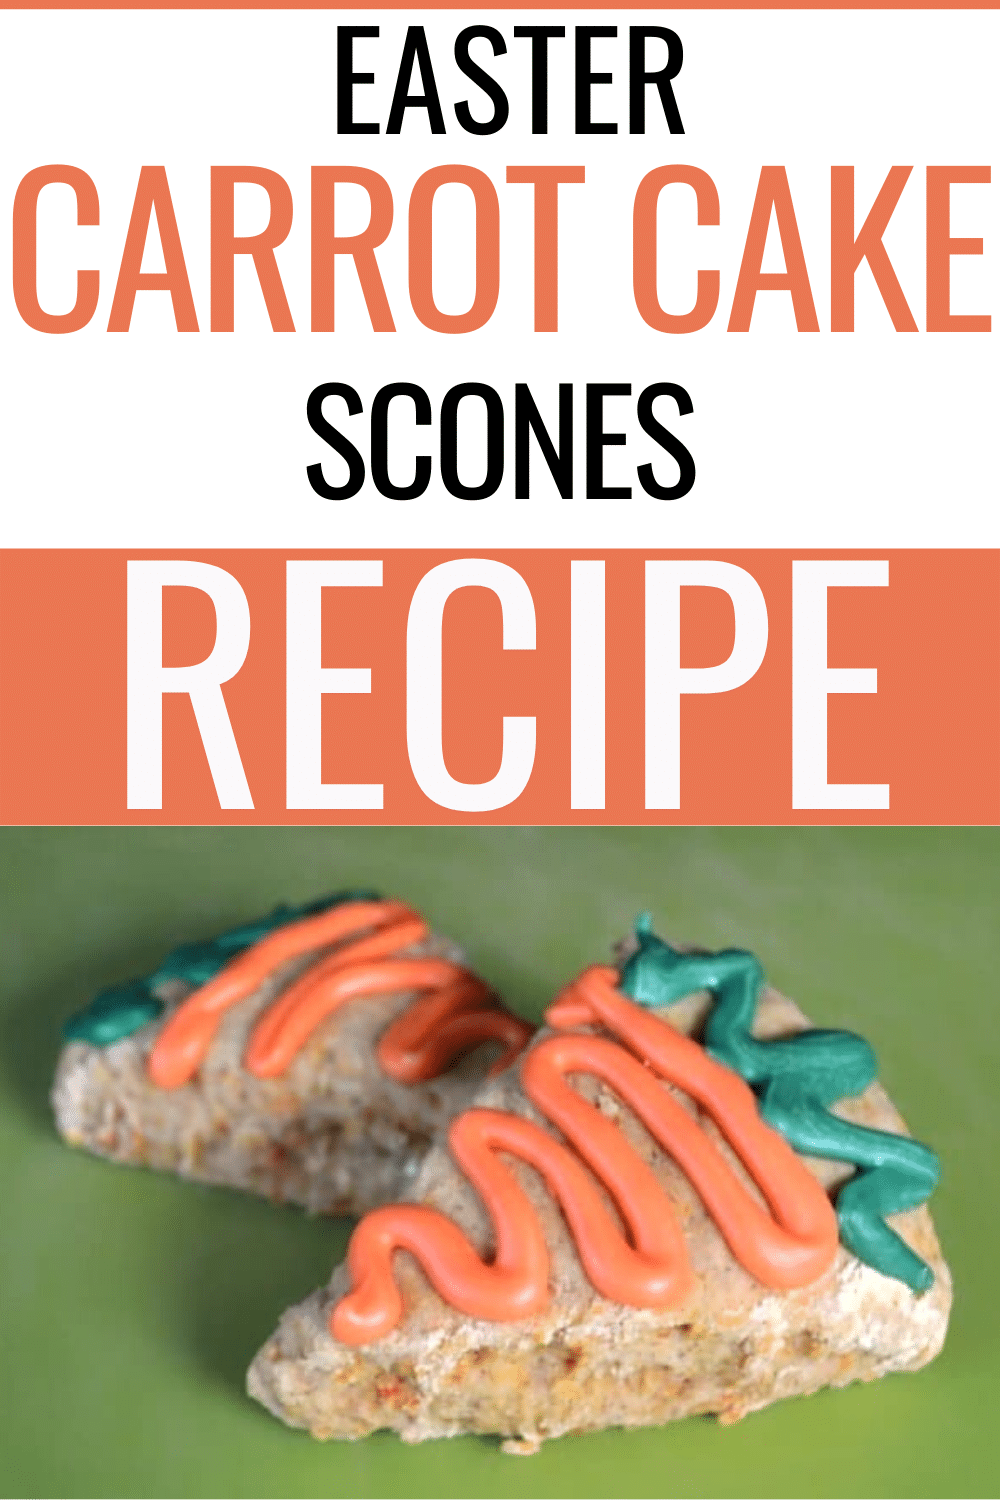 These carrot cake scones are a delicious and fun treat, perfect addition to your menu for your Spring and Easter brunches. #scones #carrotcake #easter #brunch via @wondermomwannab